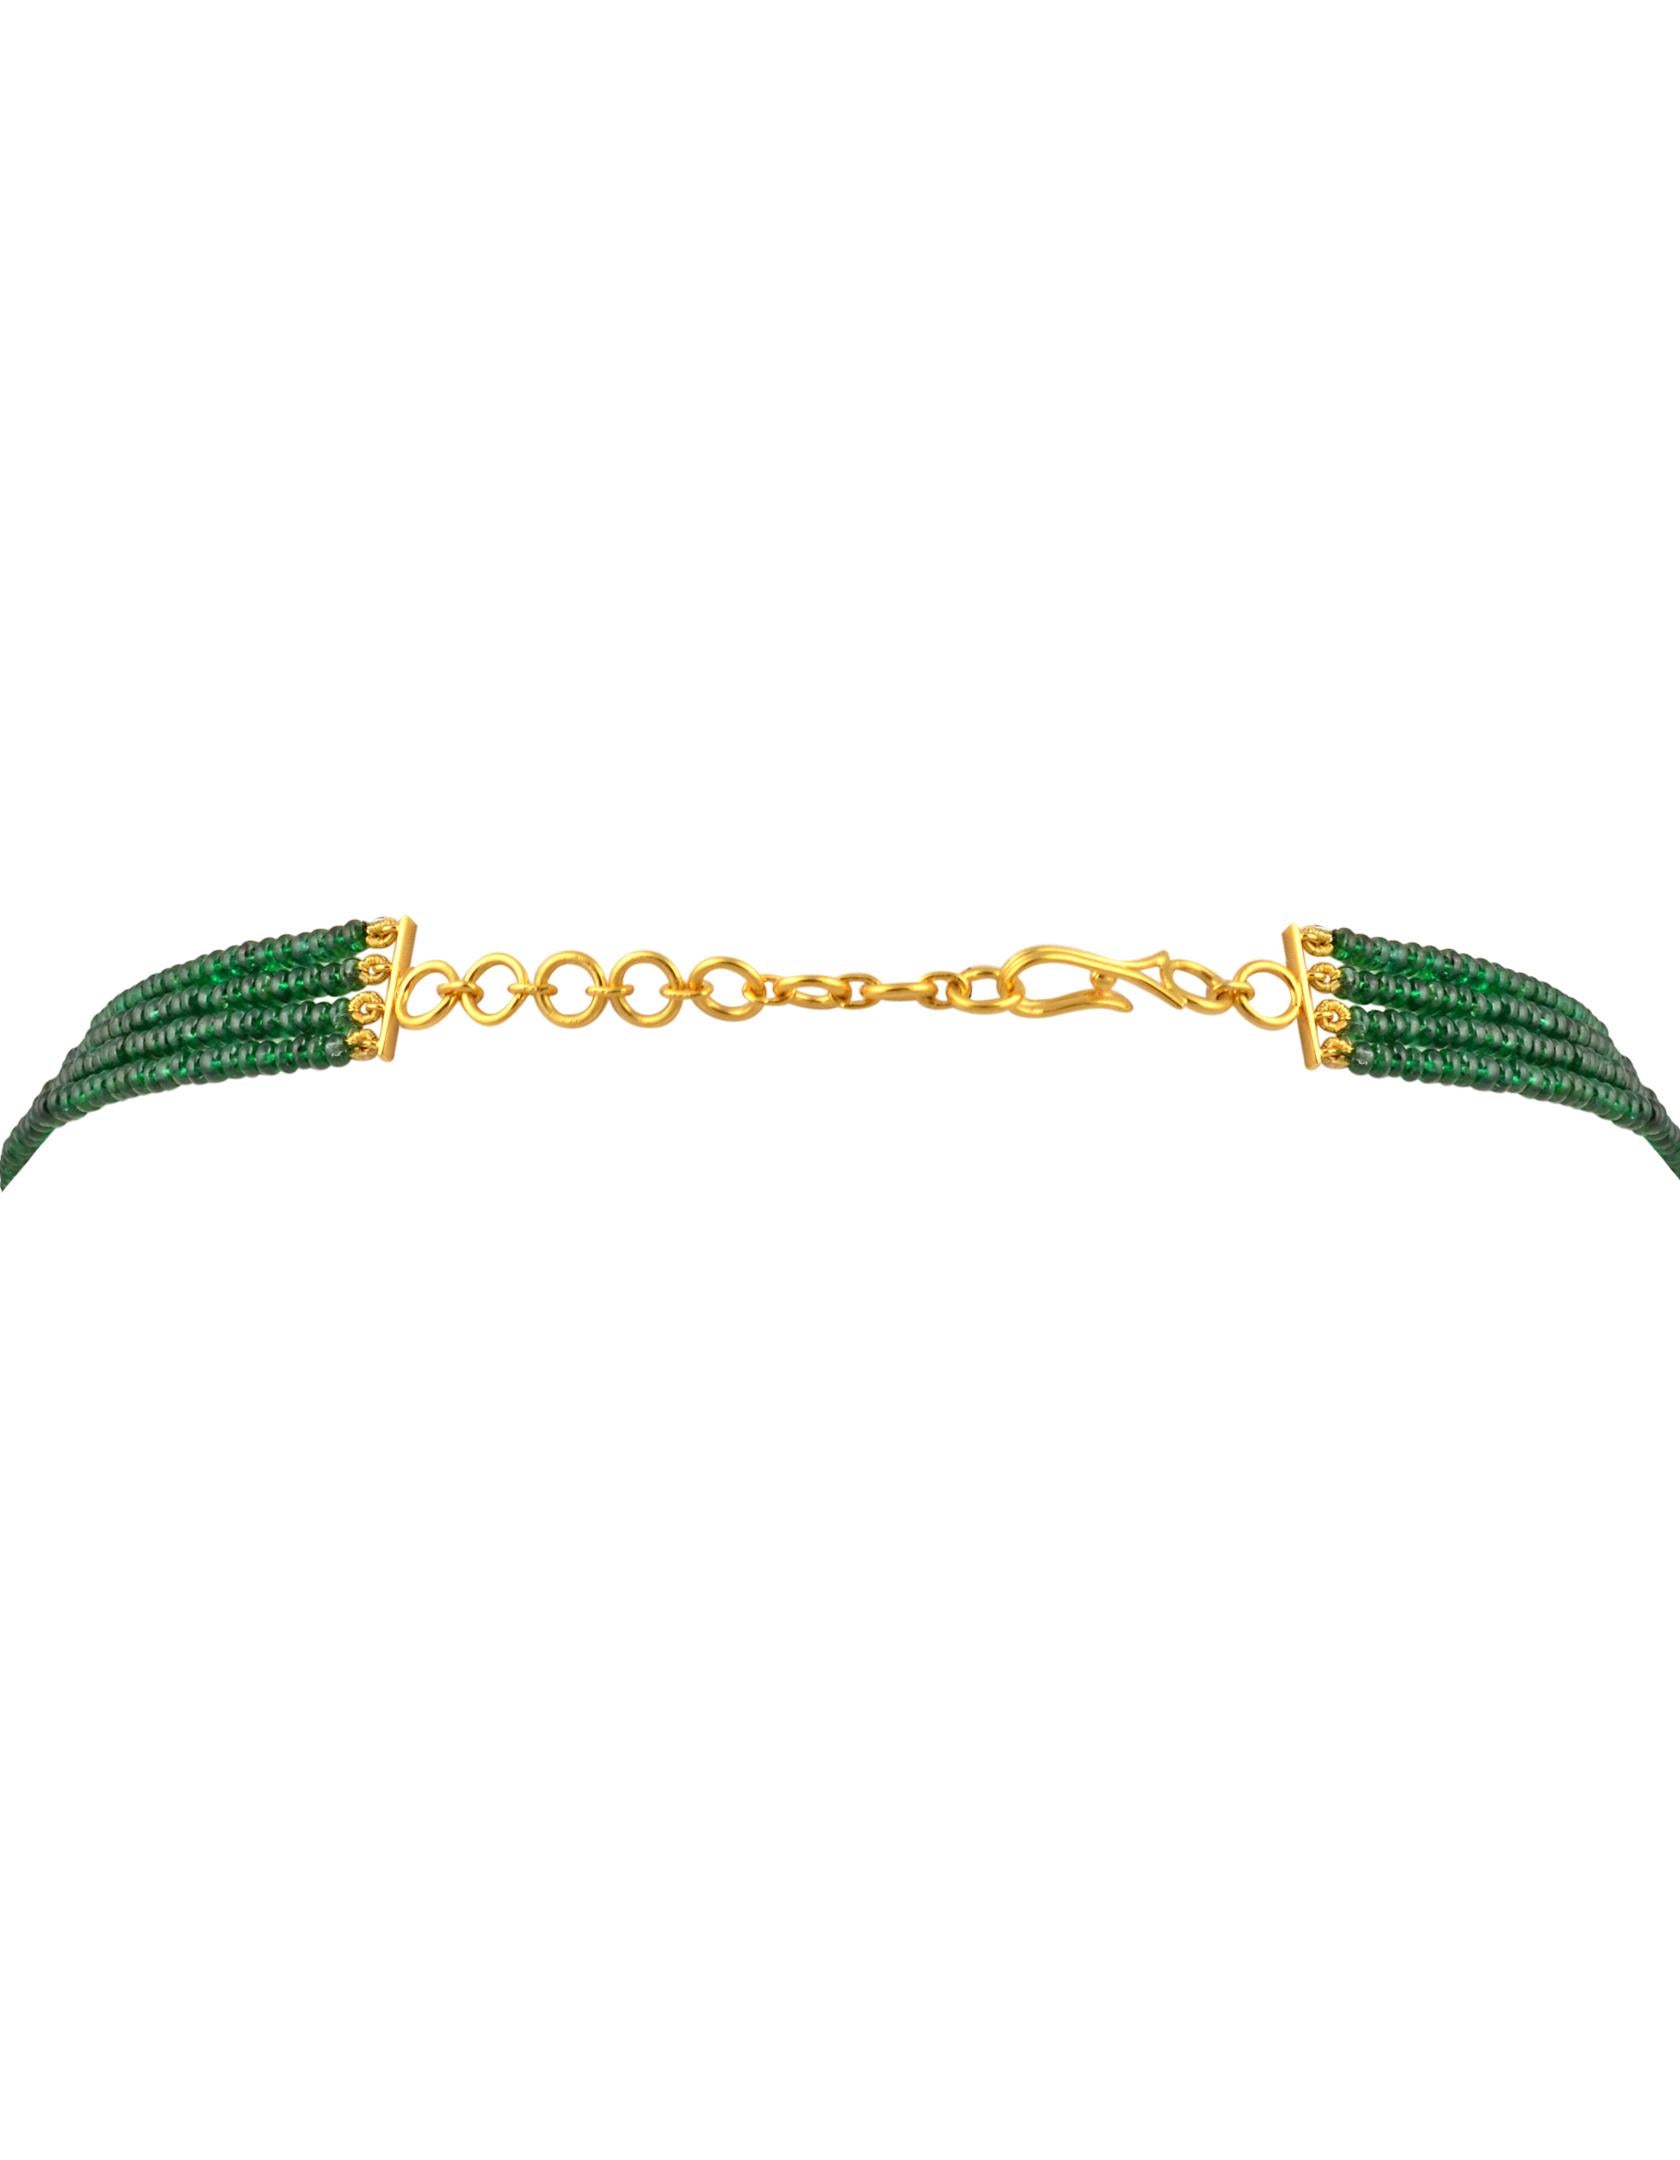 250ct Fine Emerald Beads 4 Line Necklace with 14 Kt Yellow Gold Clasp Adjustable For Sale 10